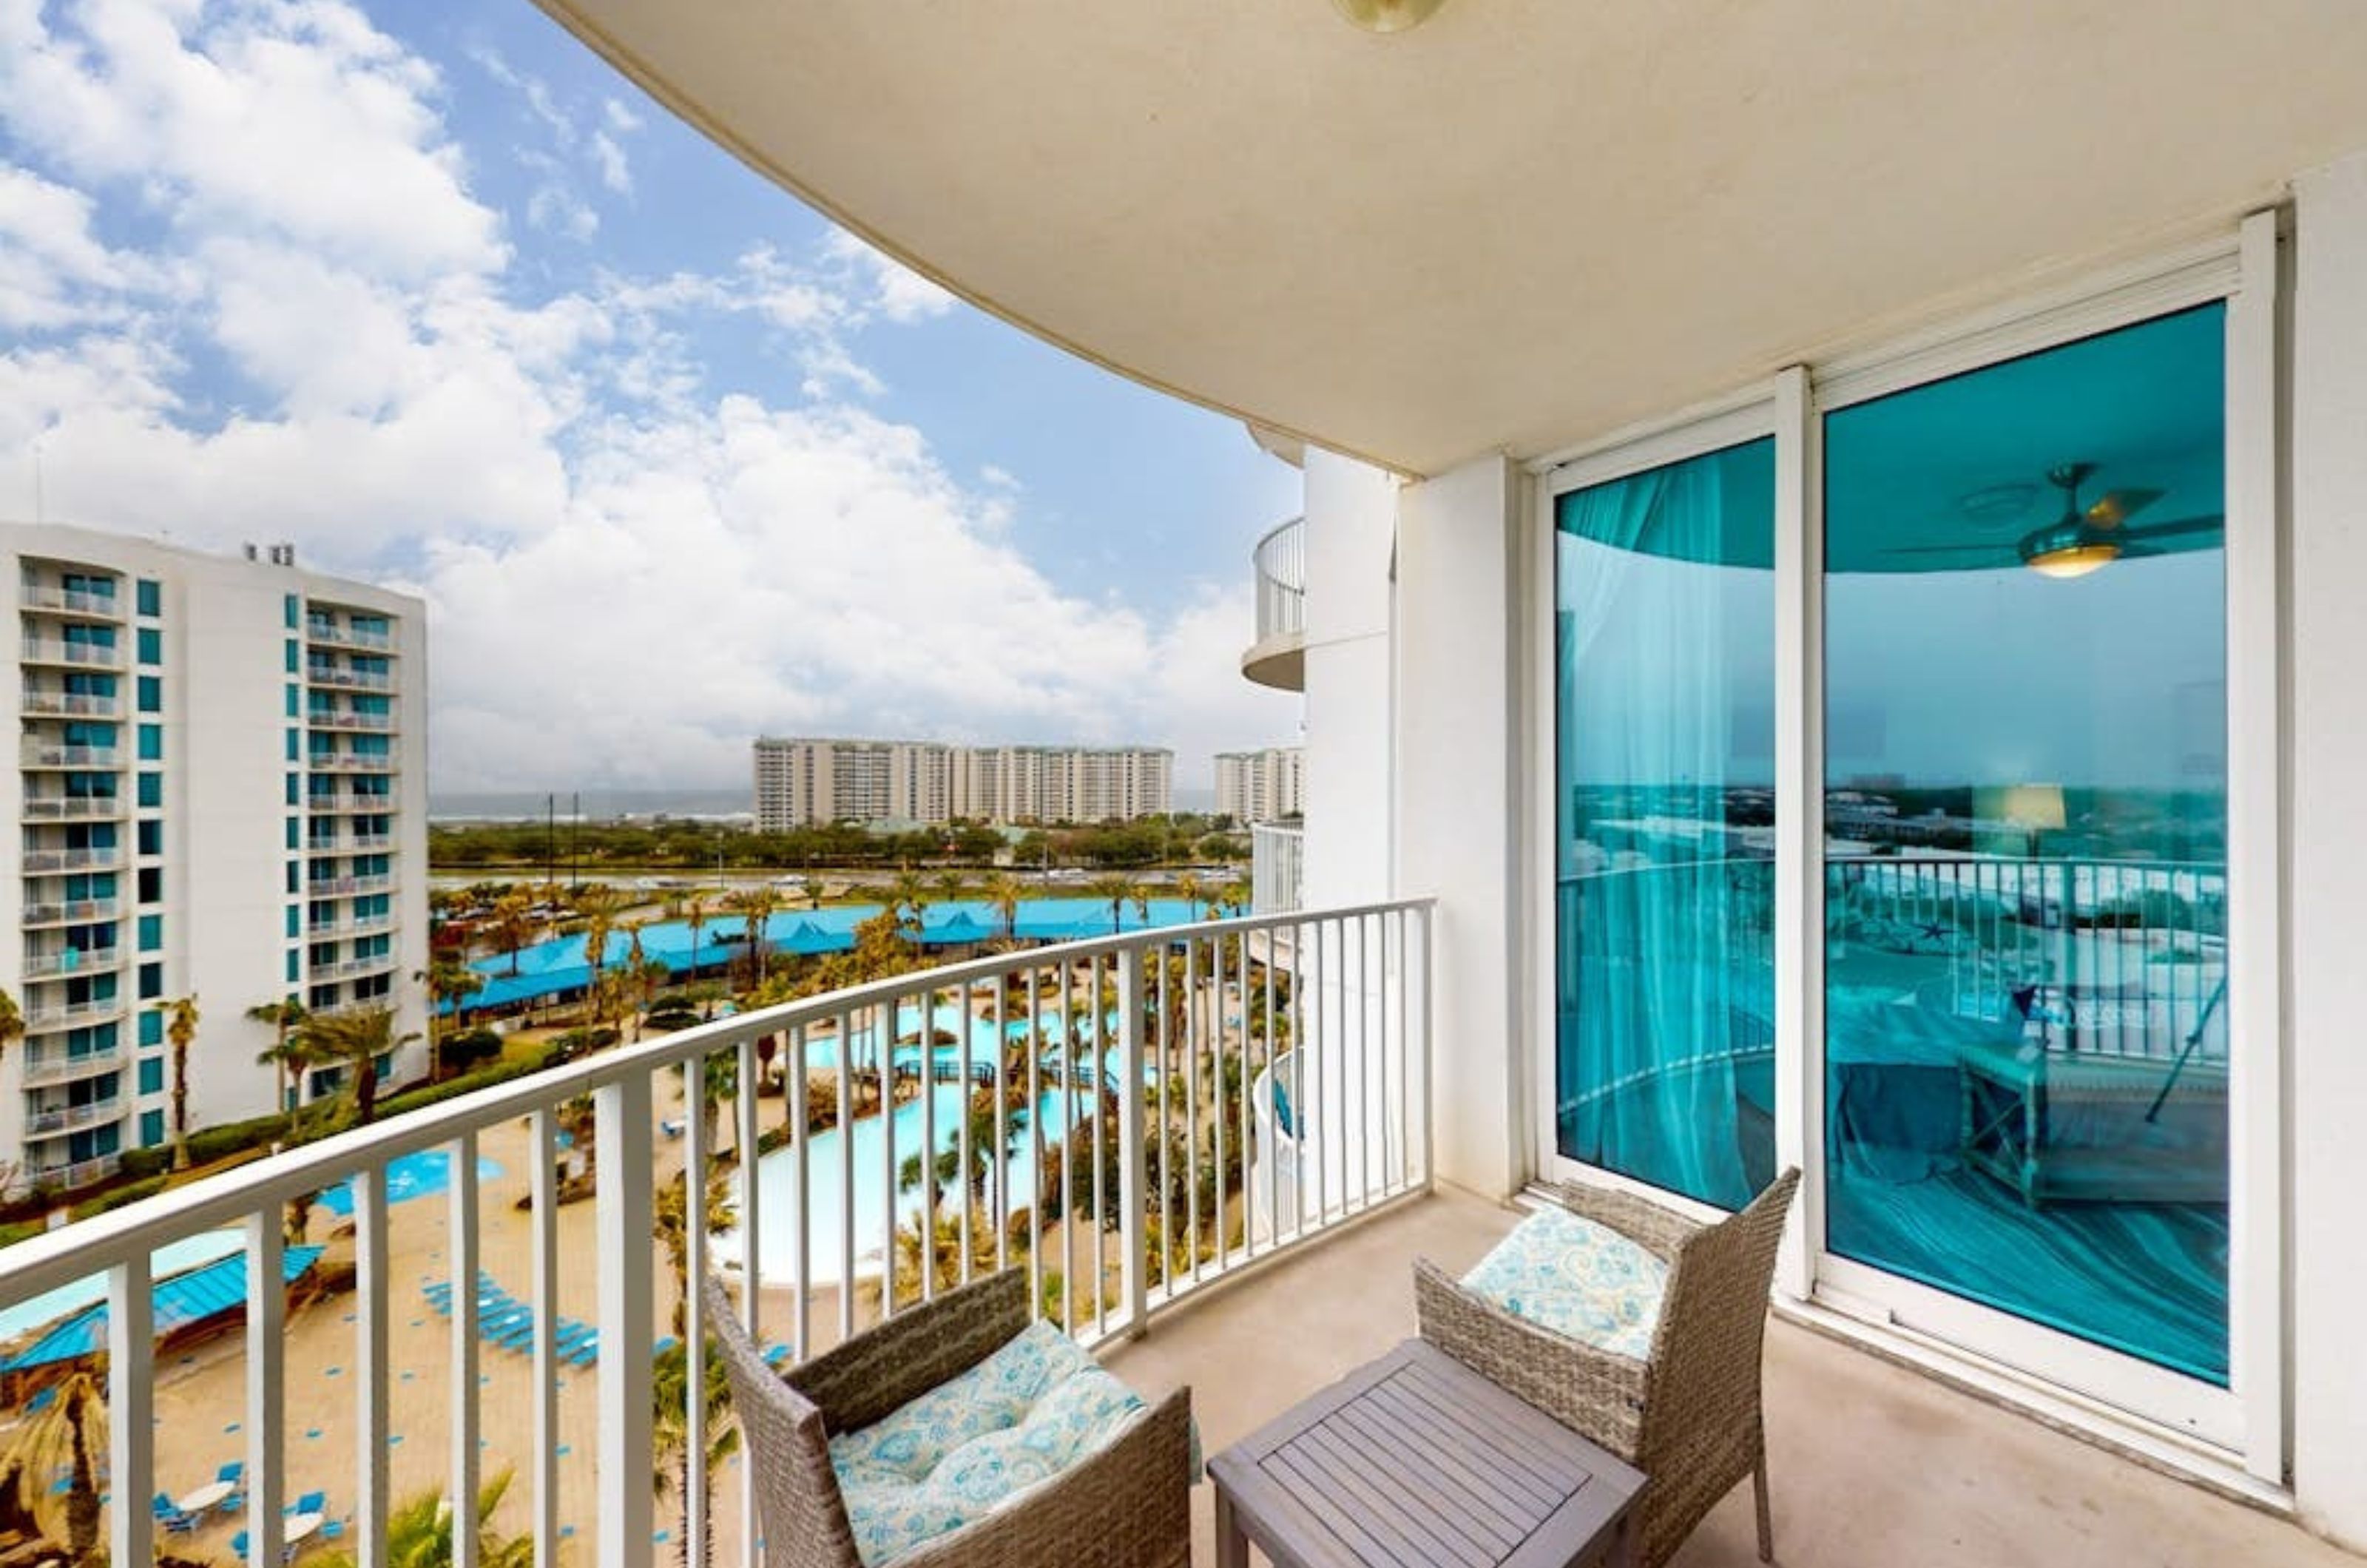 A private balcony with chairs overlooking the the pool area at the Palms of Destin in Destin Florida 